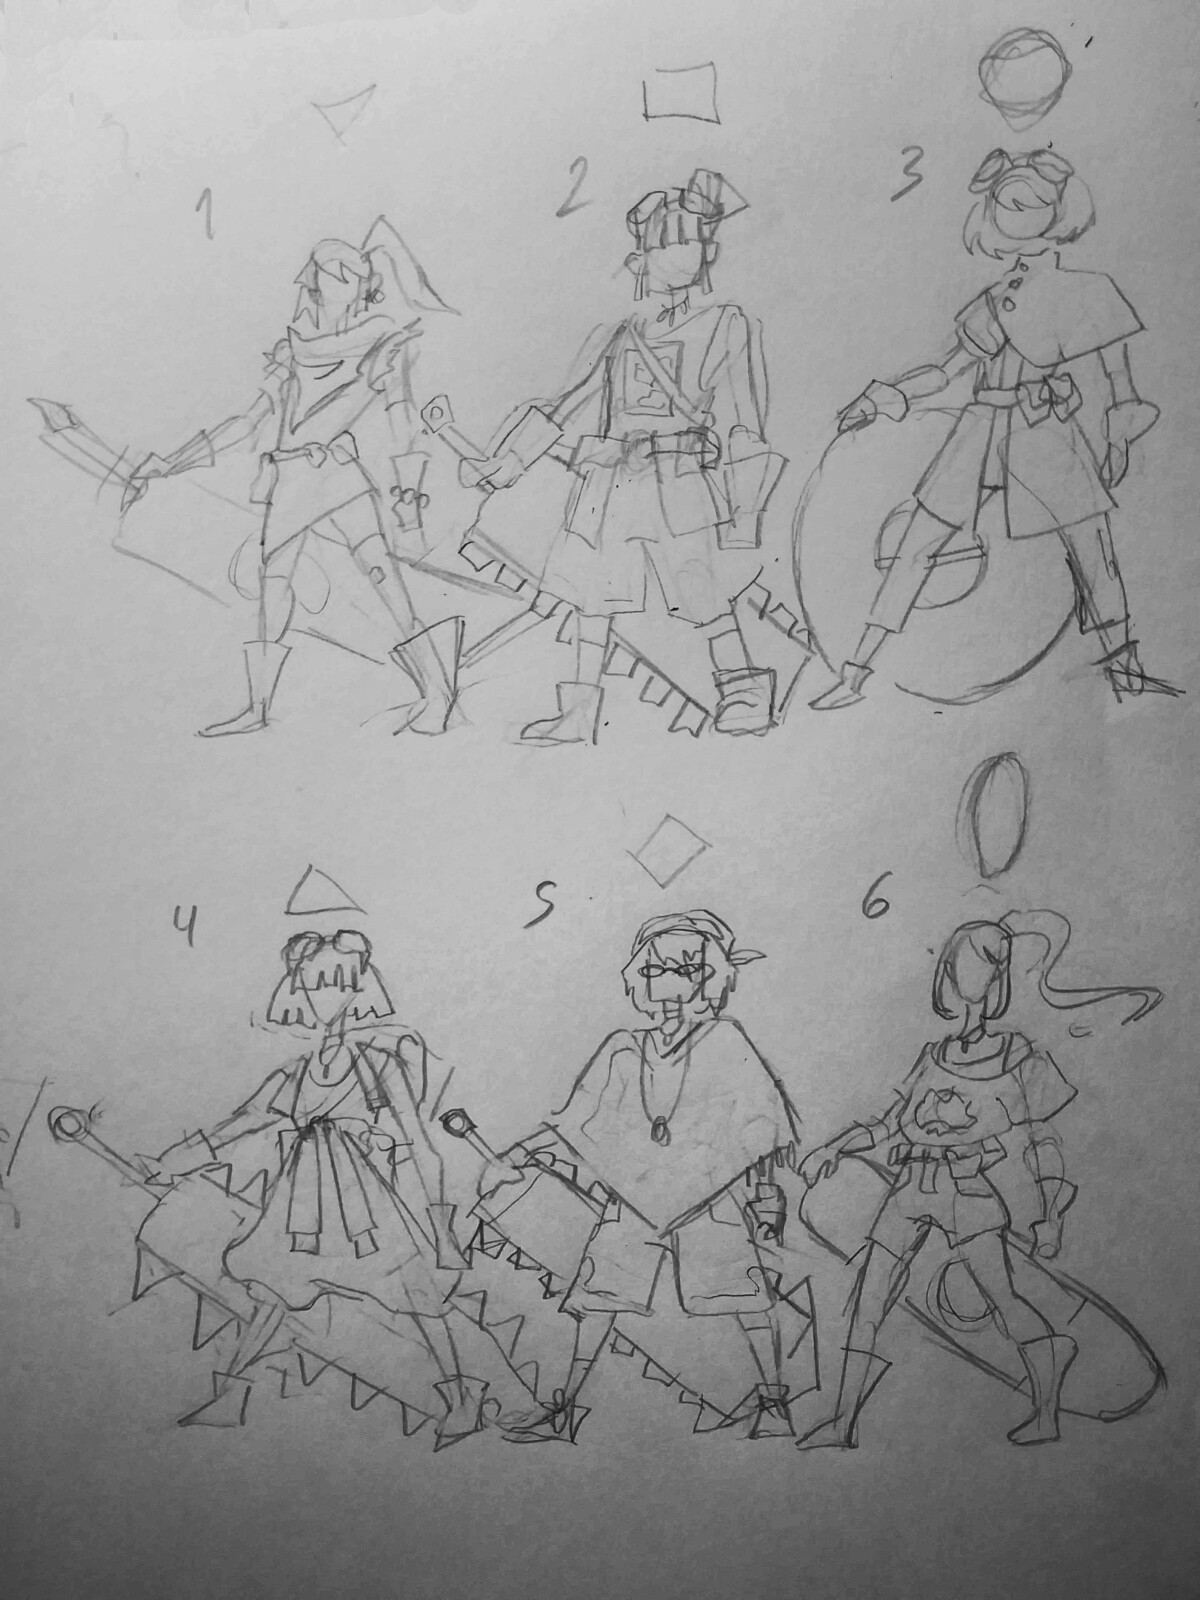 Rapid sketches for basic ideas for the character. Originally, the character was going to be a young archaeologist who found the magic hoverboard. At this point in time there was no staff.